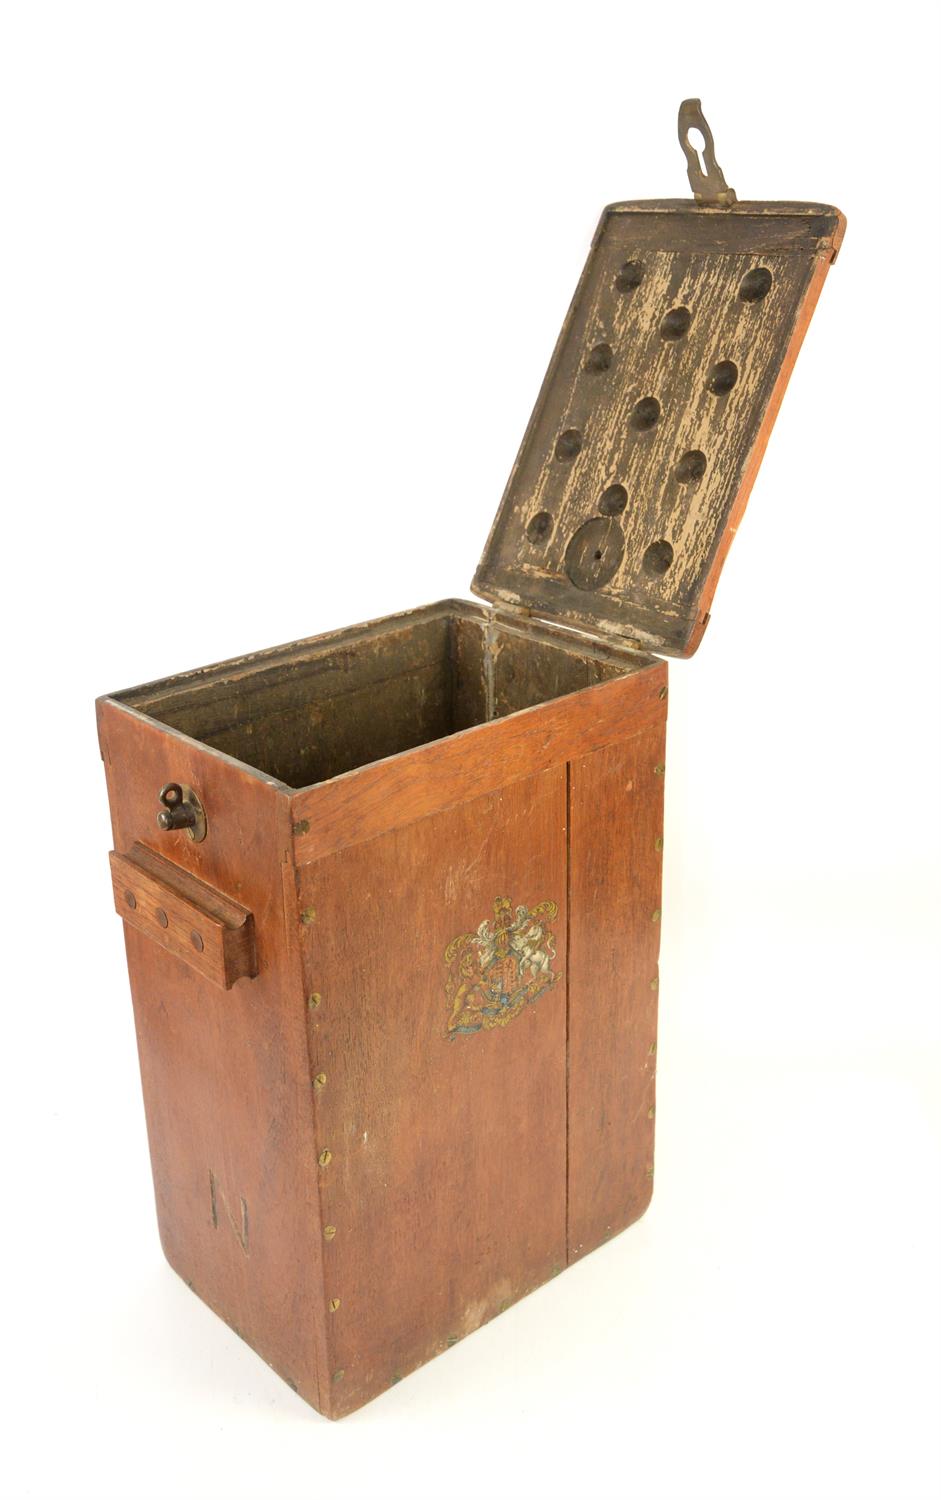 Mahogany and brass mounted box, painted with Royal Crest, H55.5 x W25.5 x D37cm - Image 2 of 2